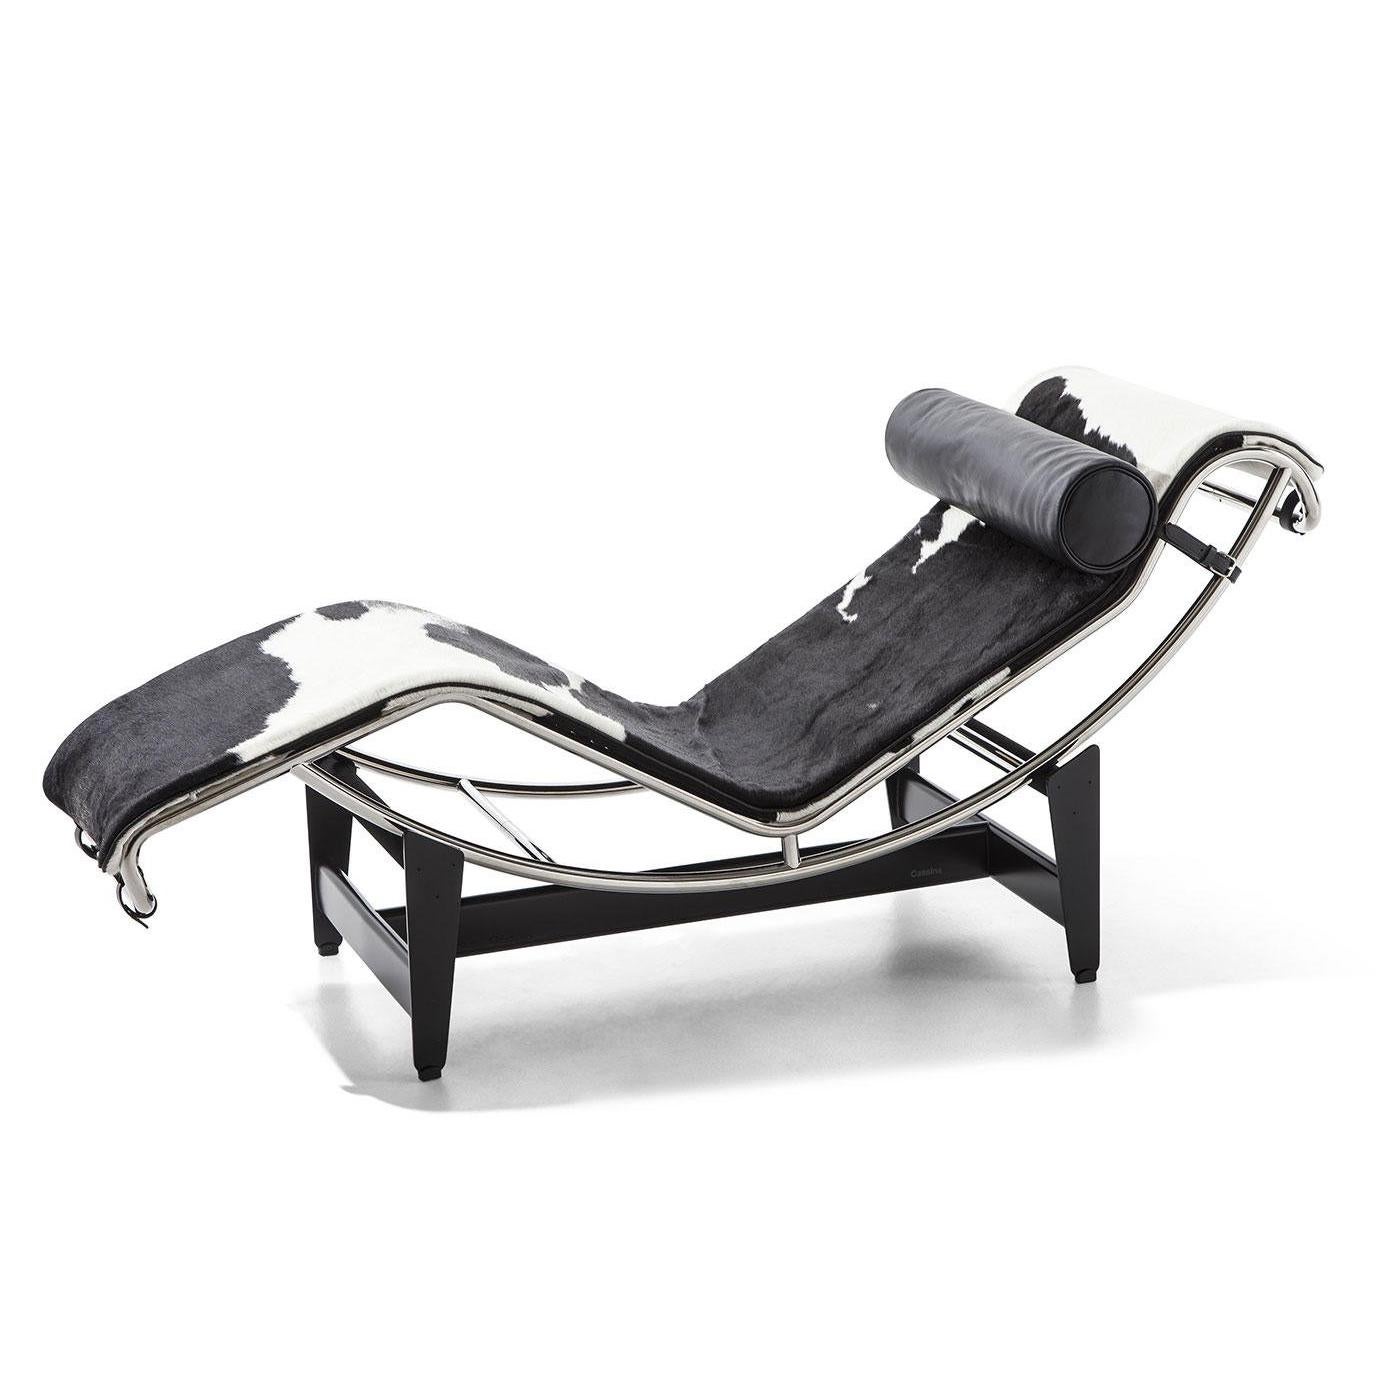 Chaise lounge designed by Le Corbusier, Pierre Jeanneret, Charlotte Perriand in 1928.
Manufactured by Cassina in Italy.

Chaise lounge with adjustable polished trivalent chrome plated (CR3) steel frame. Black enamel steel base.

Designed in